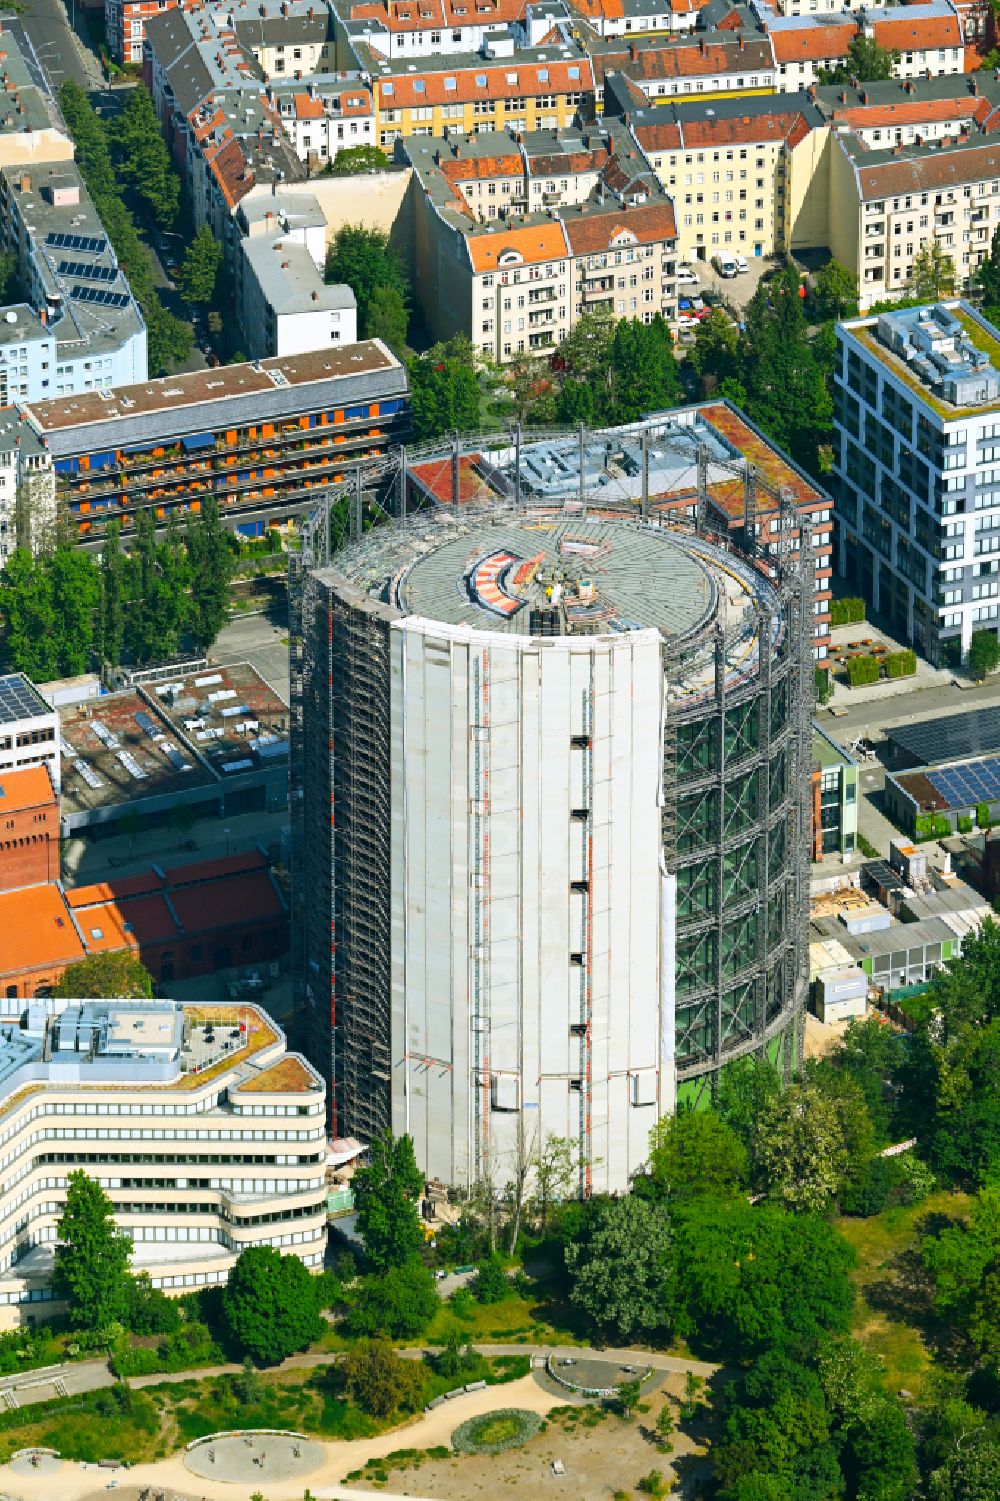 Aerial photograph Berlin - Gasometer high storage tank during conversion and renovation in the district Schoeneberg in Berlin, Germany